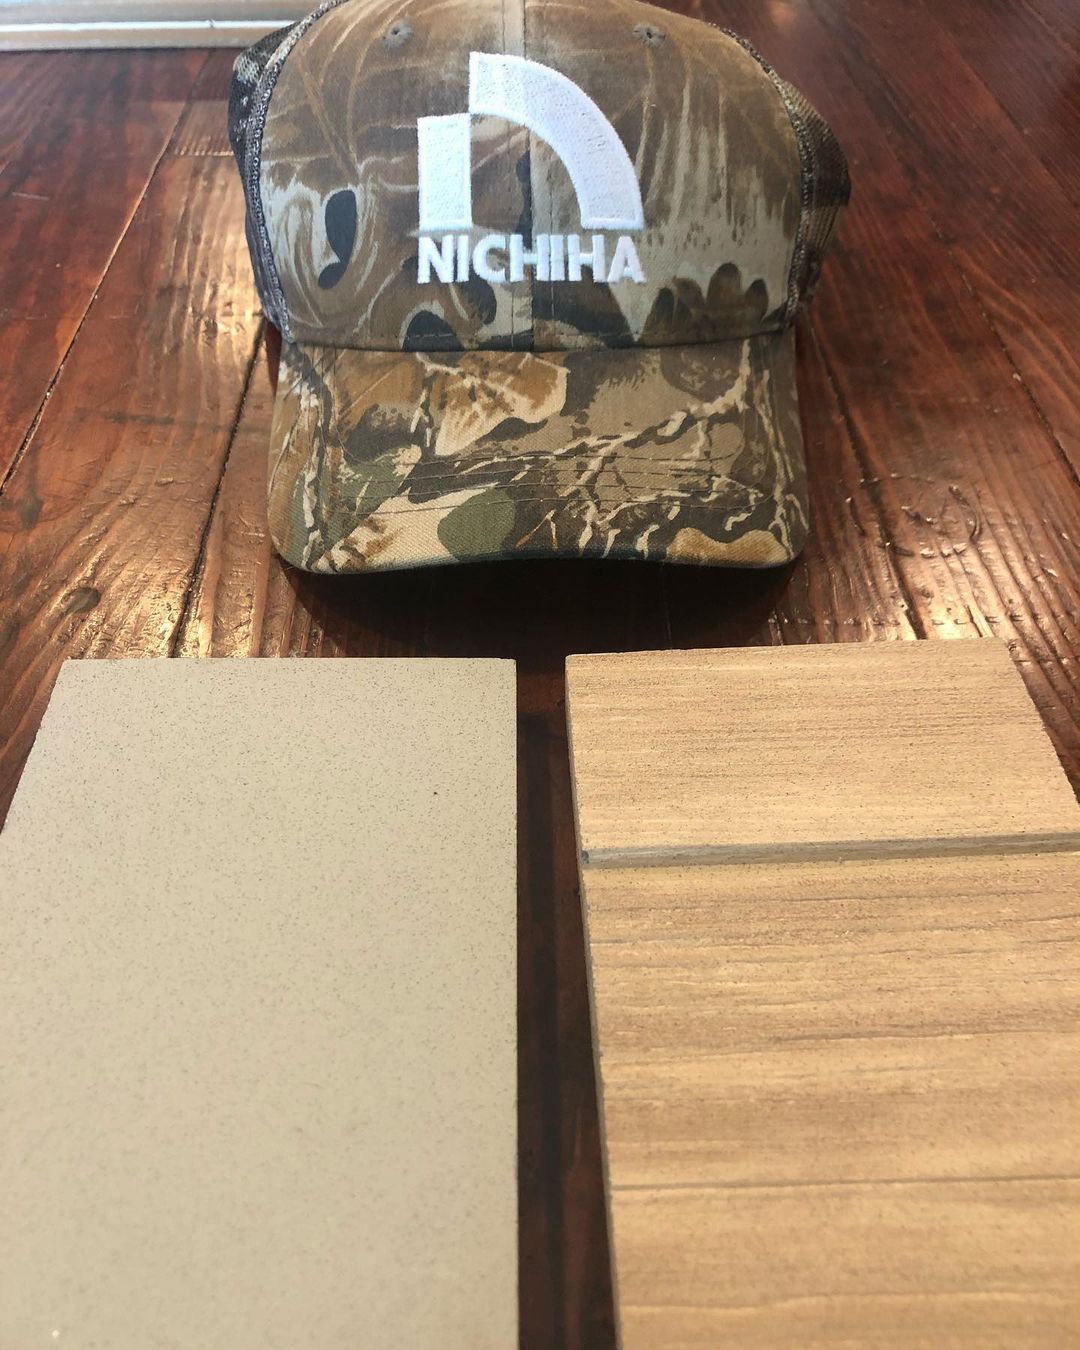 Samples of Nichiha fiber cement in VintageWood and ArchBlock in front of a camo hat with a Nichiha logo